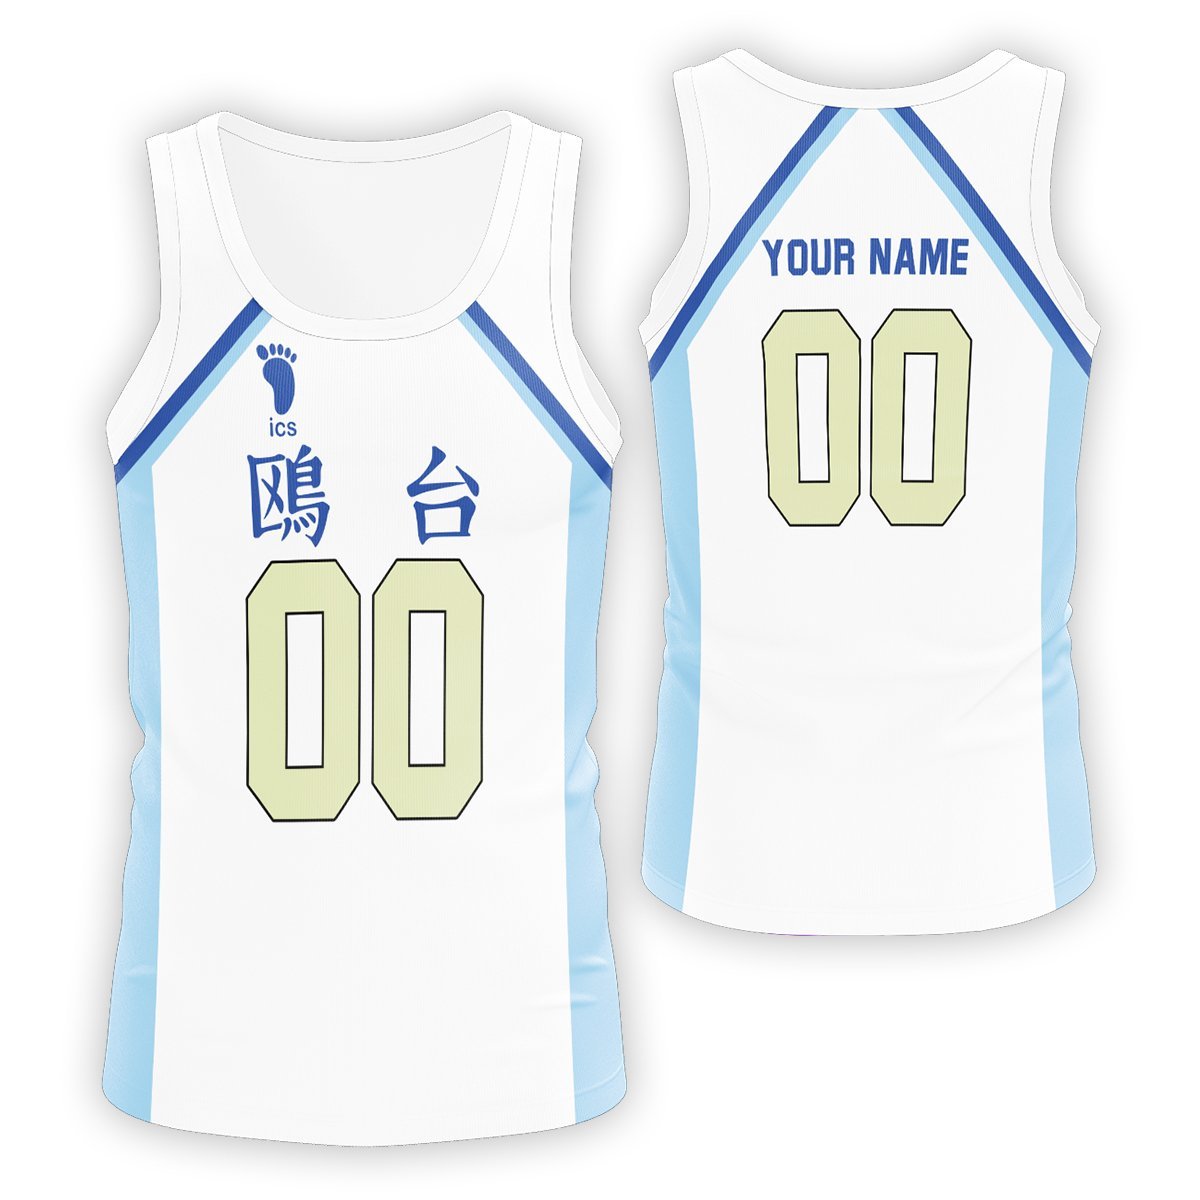 Personalized Team Kamomedai Unisex Tank Tops FDM3107 S Official Anime Swimsuit Merch